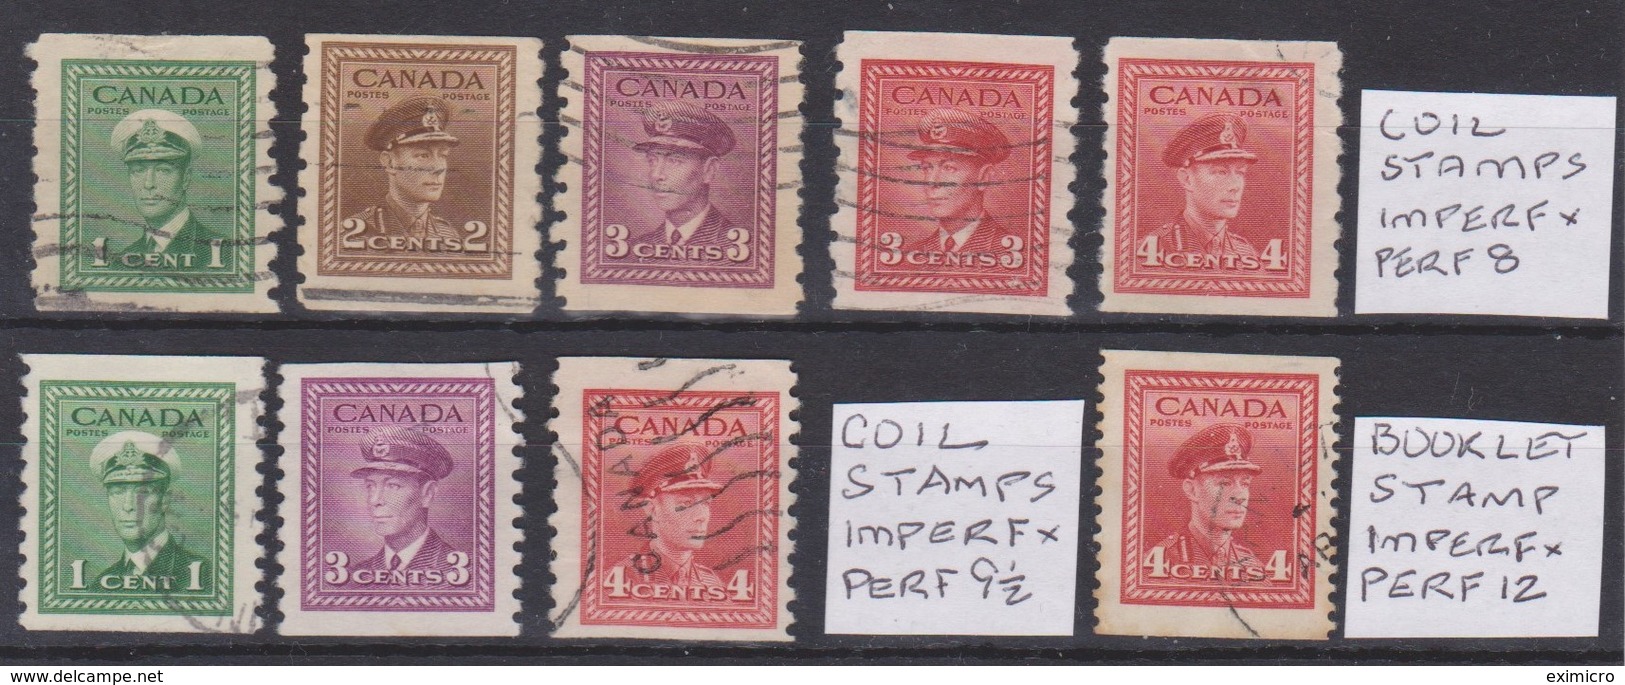 CANADA 1942 - 1948 COIL AND BOOKLET STAMPS SG 389/393, 396, 397, 398, 398a FINE USED Cat £46+ - Rollen